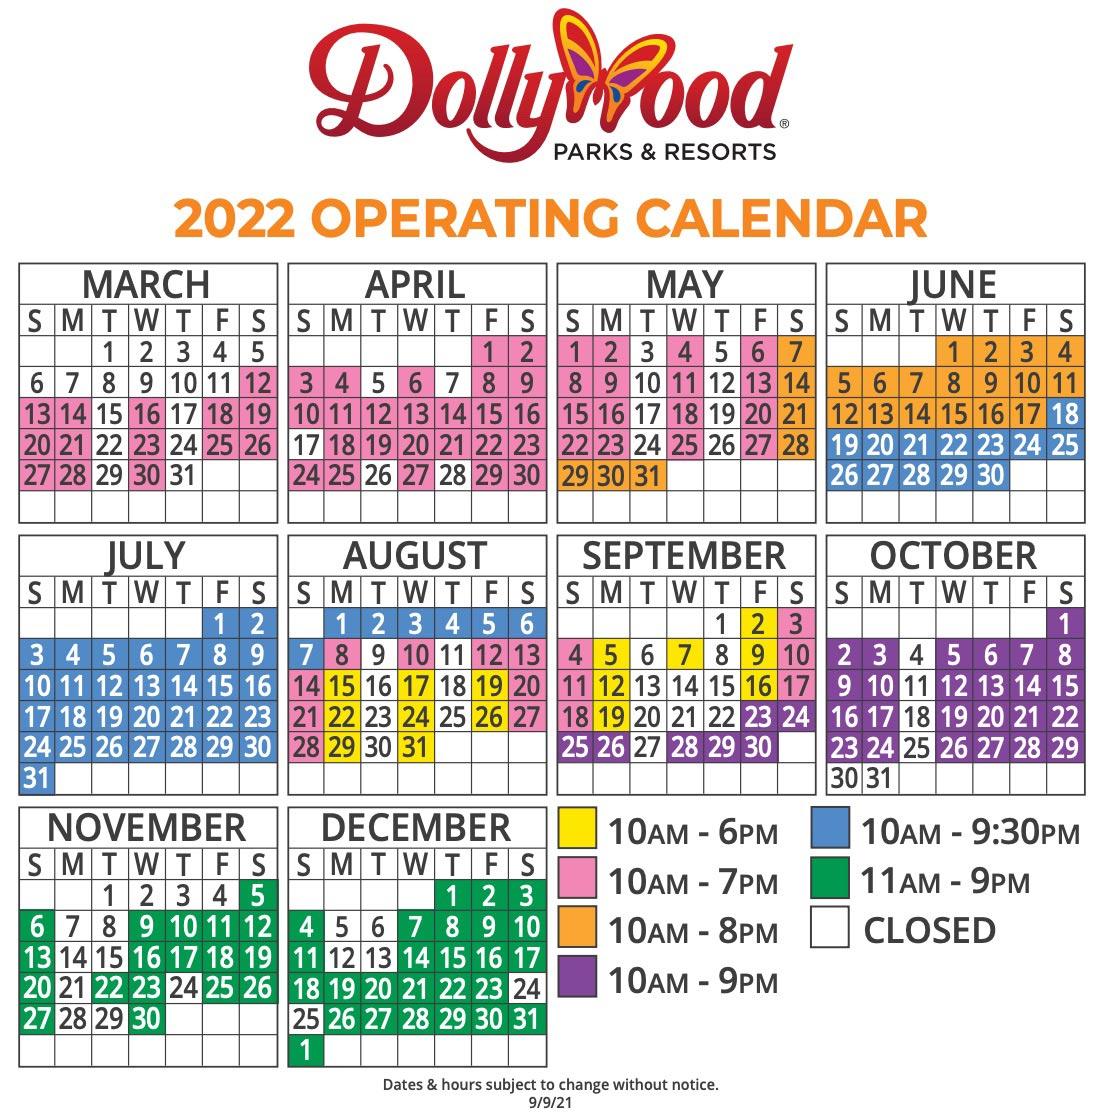 Dollywood Schedule 2022 and Guide Dates, Hours, Rides, Shows, etc